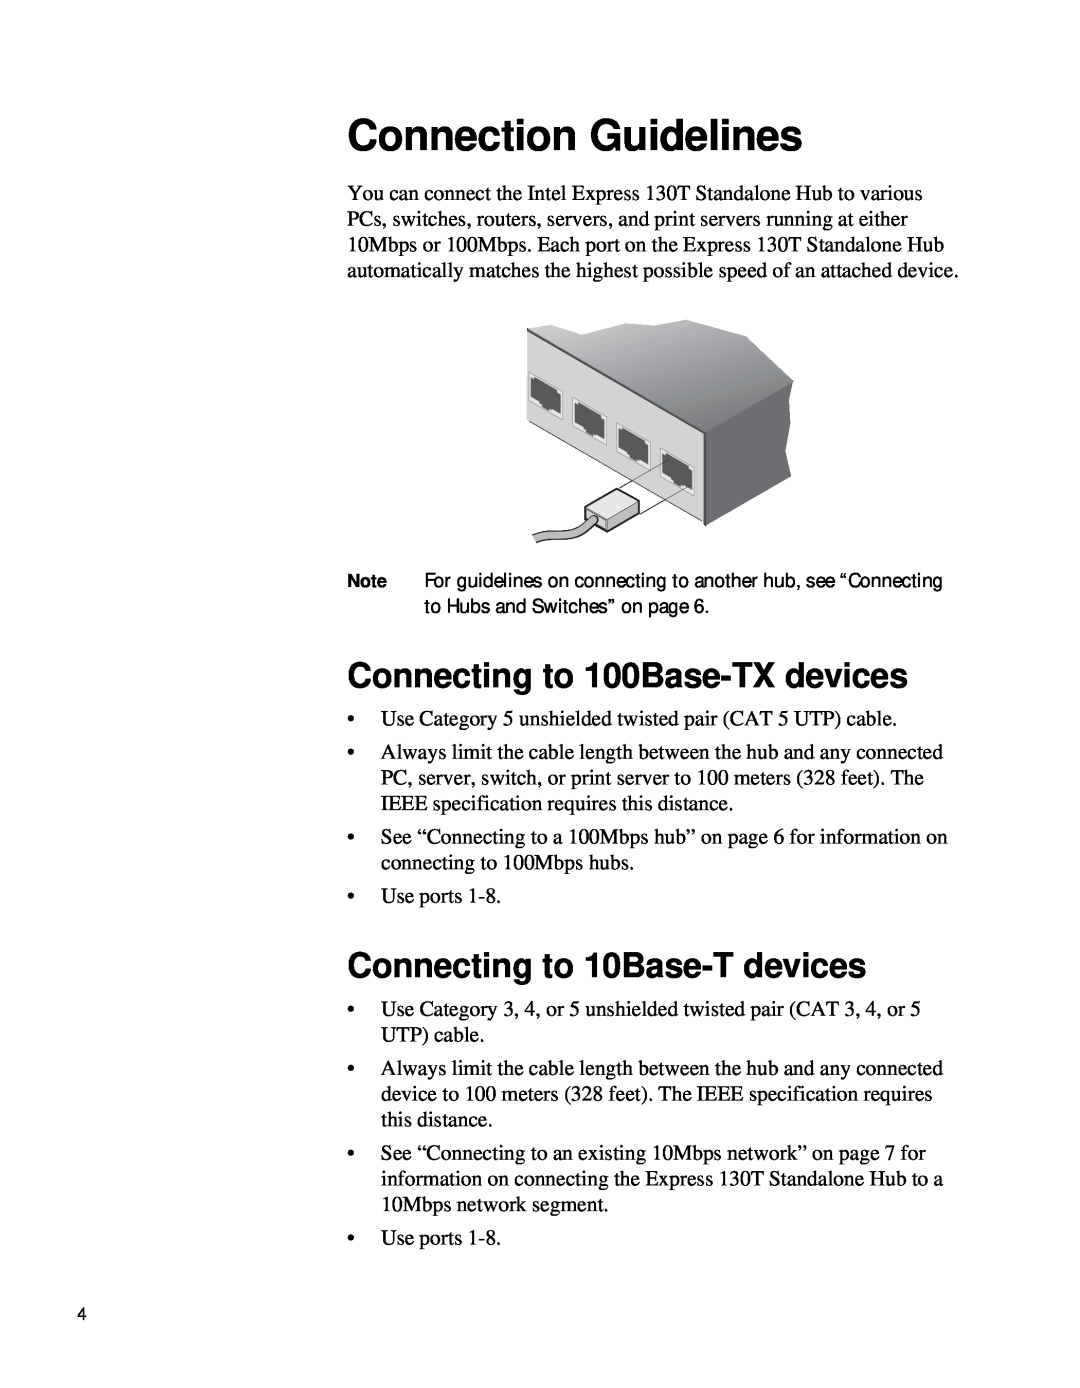 Intel 130T manual Connection Guidelines, Connecting to 100Base-TX devices, Connecting to 10Base-T devices 